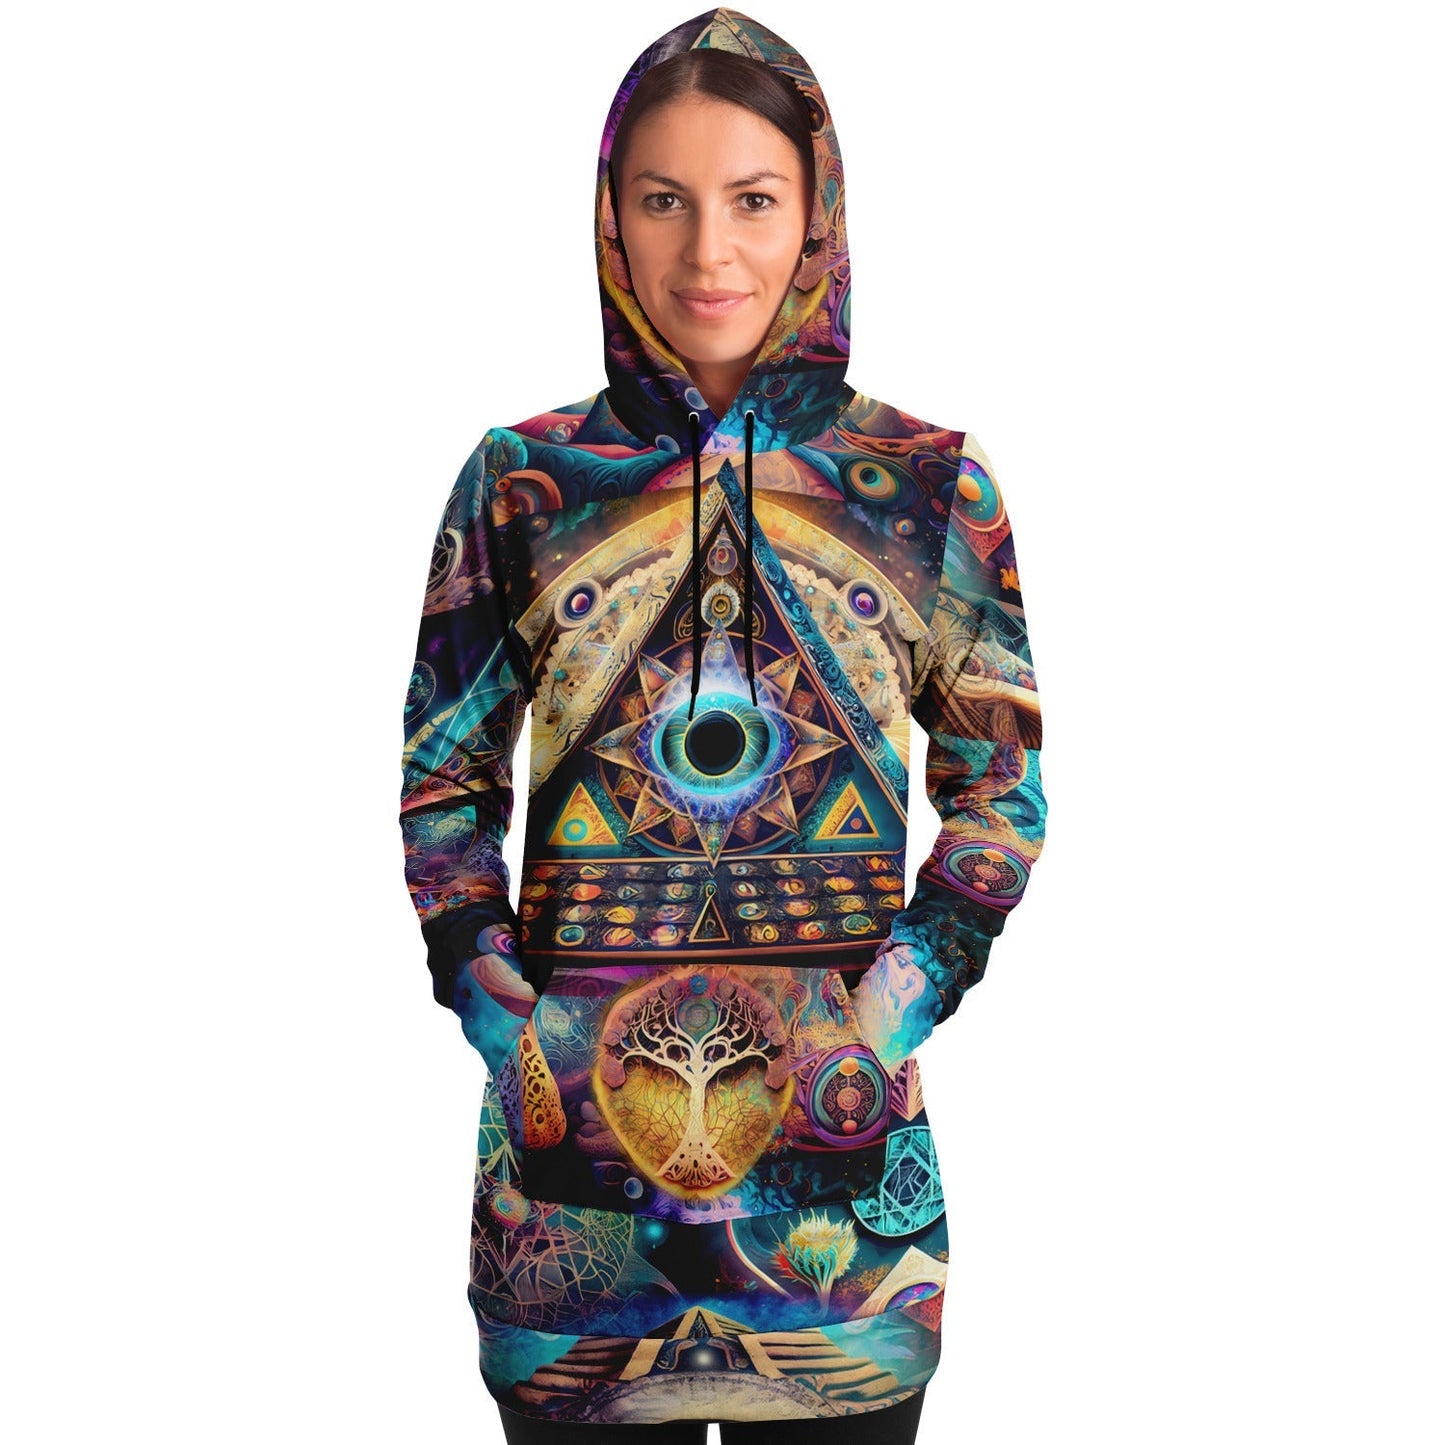 Athletic Longline Hoodie Dress with a Cosmic Eye, Ancient Pyramids, Esoteric Symbol HOO-DESIGN.SHOP